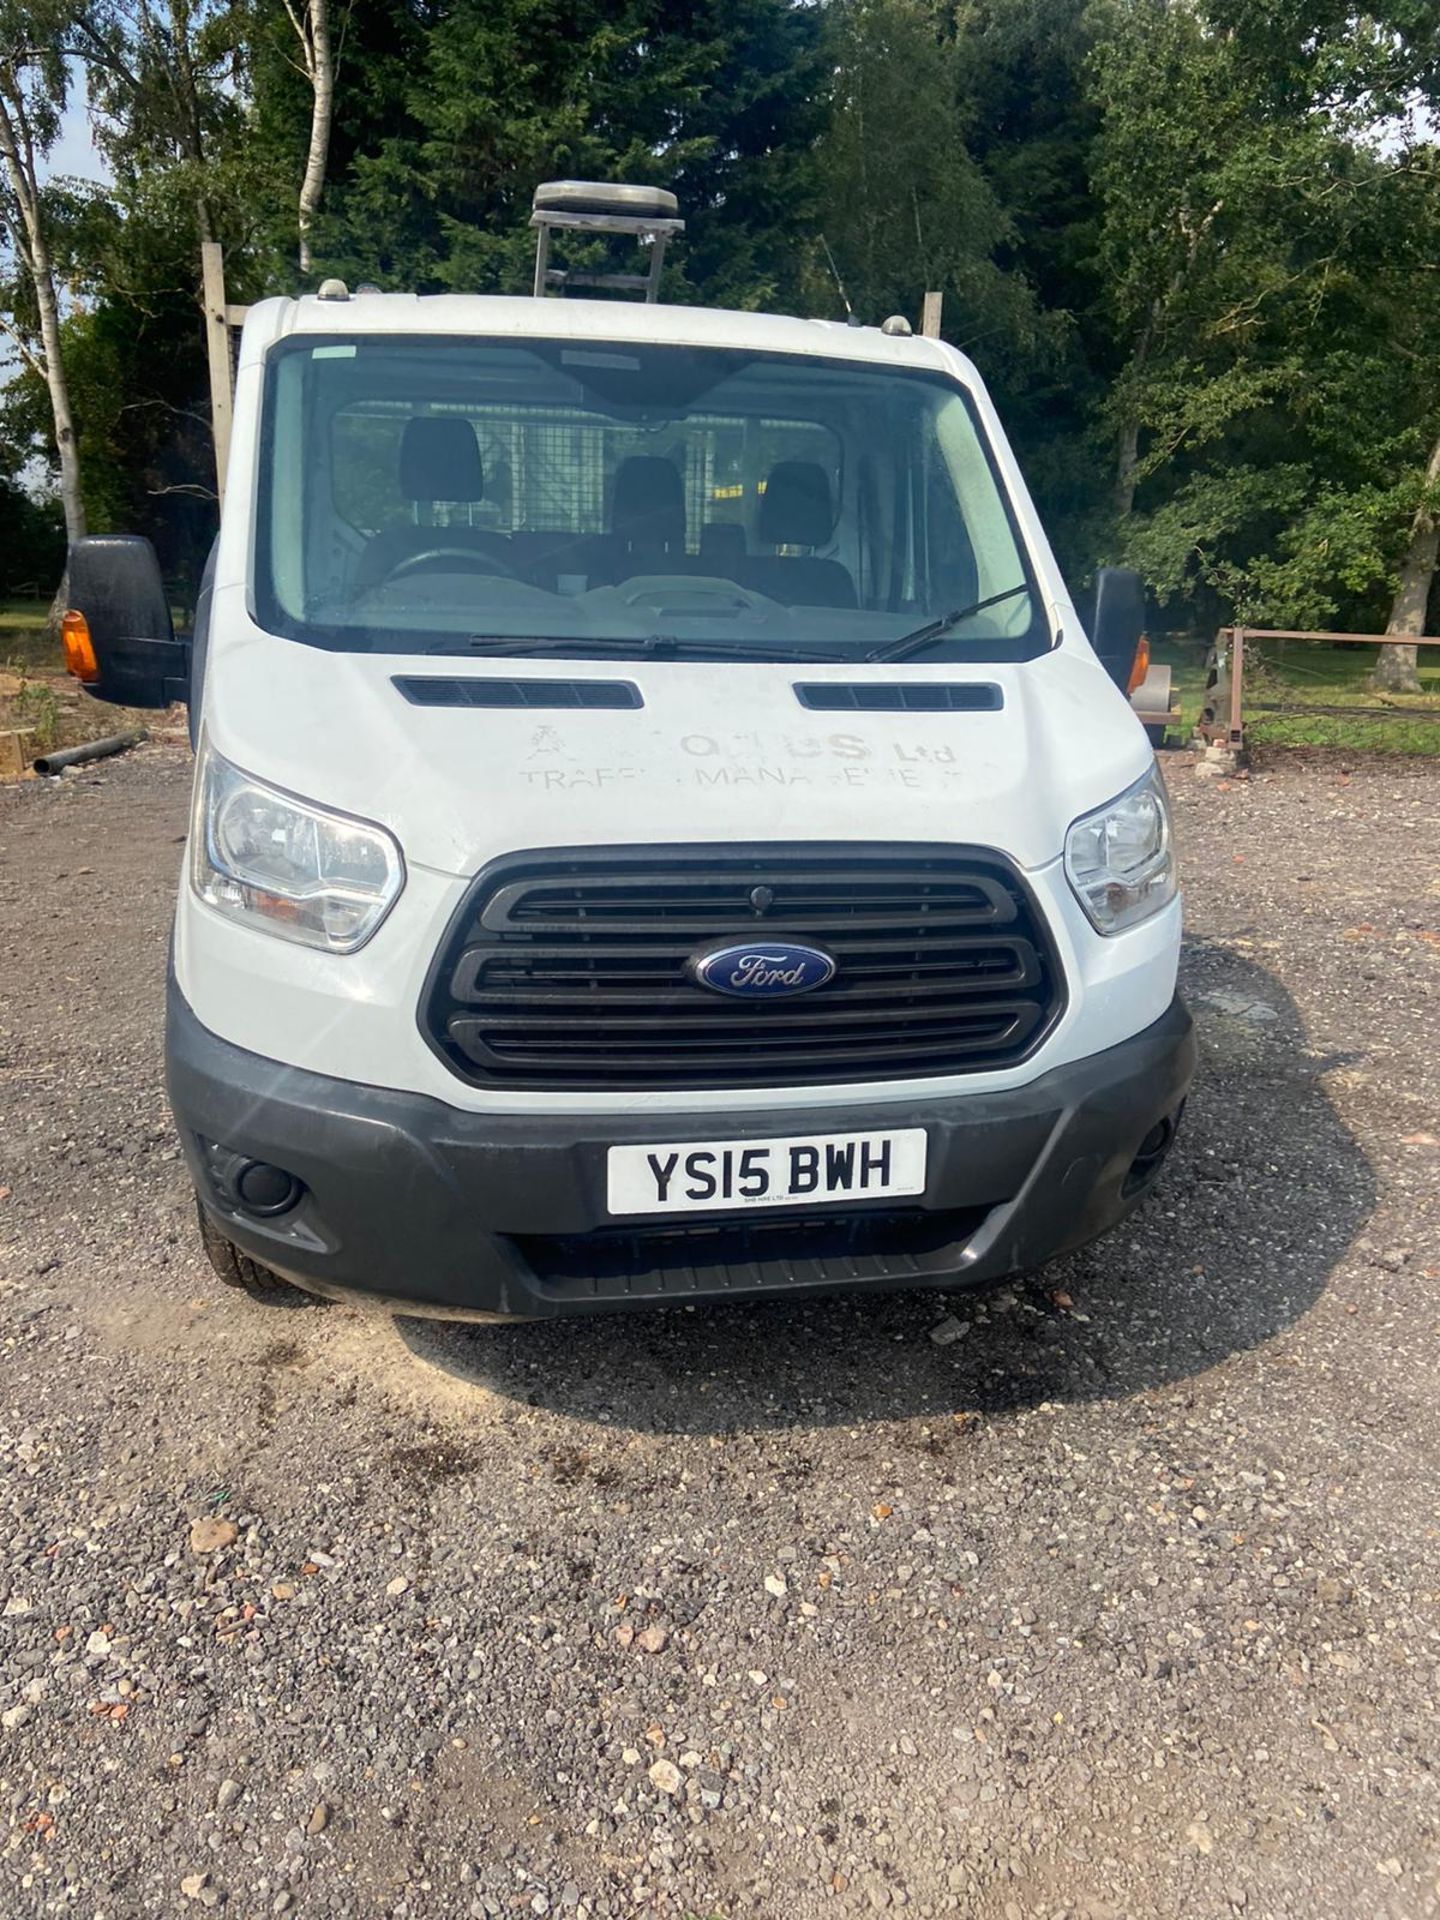 2015/15 REG FORD TRANSIT 350 WHITE DROPSIDE LORRY 2.2 DIESEL, SHOWING 0 FORMER KEEPERS *PLUS VAT* - Image 2 of 10